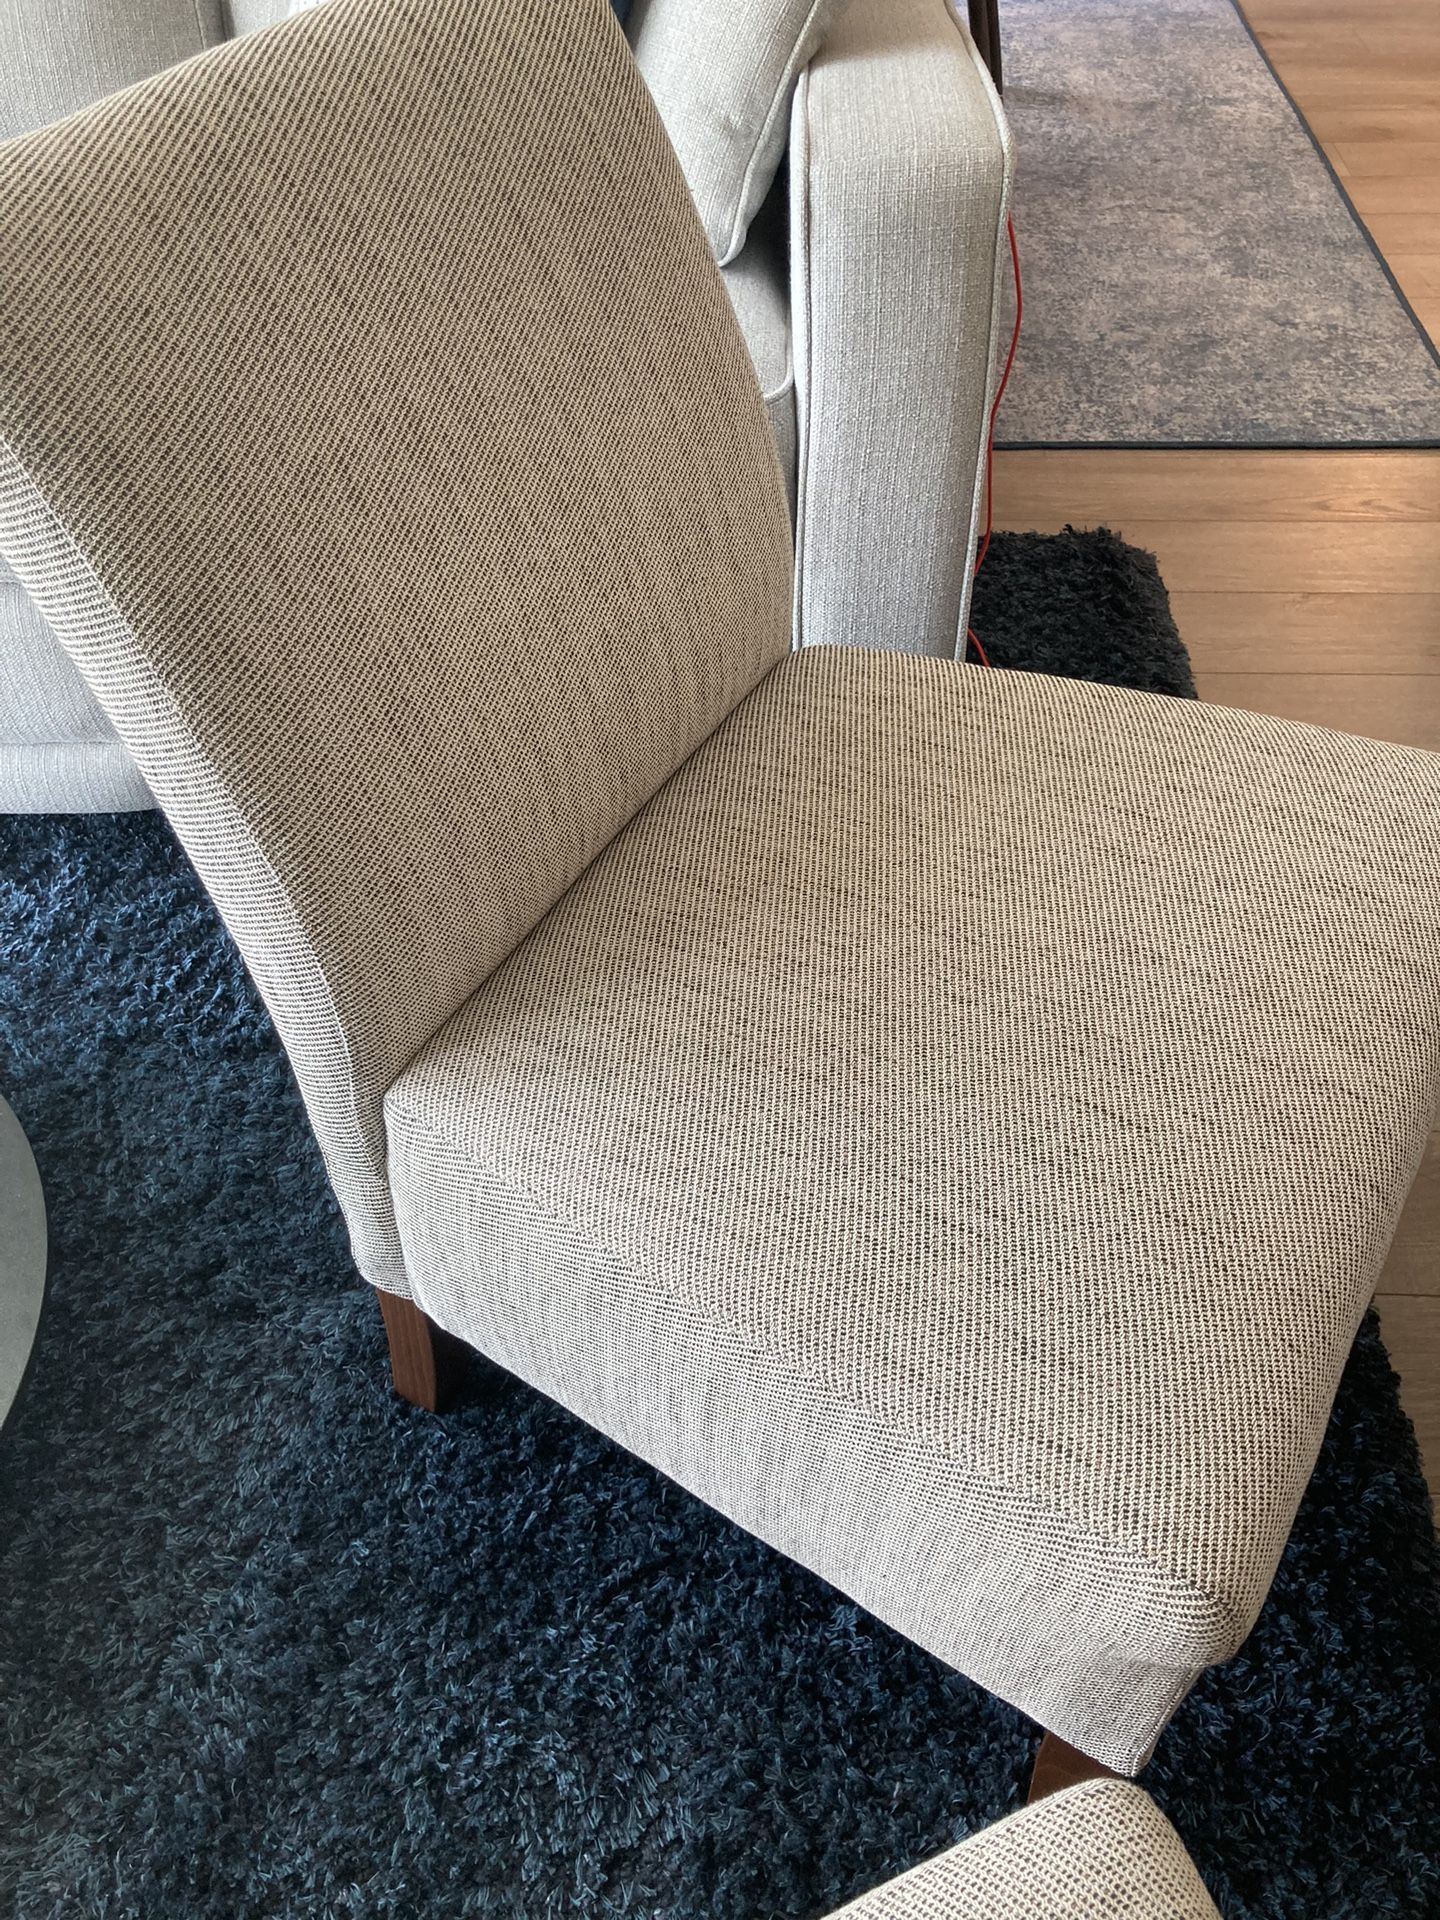 2 Upholstered Chairs From Ikea